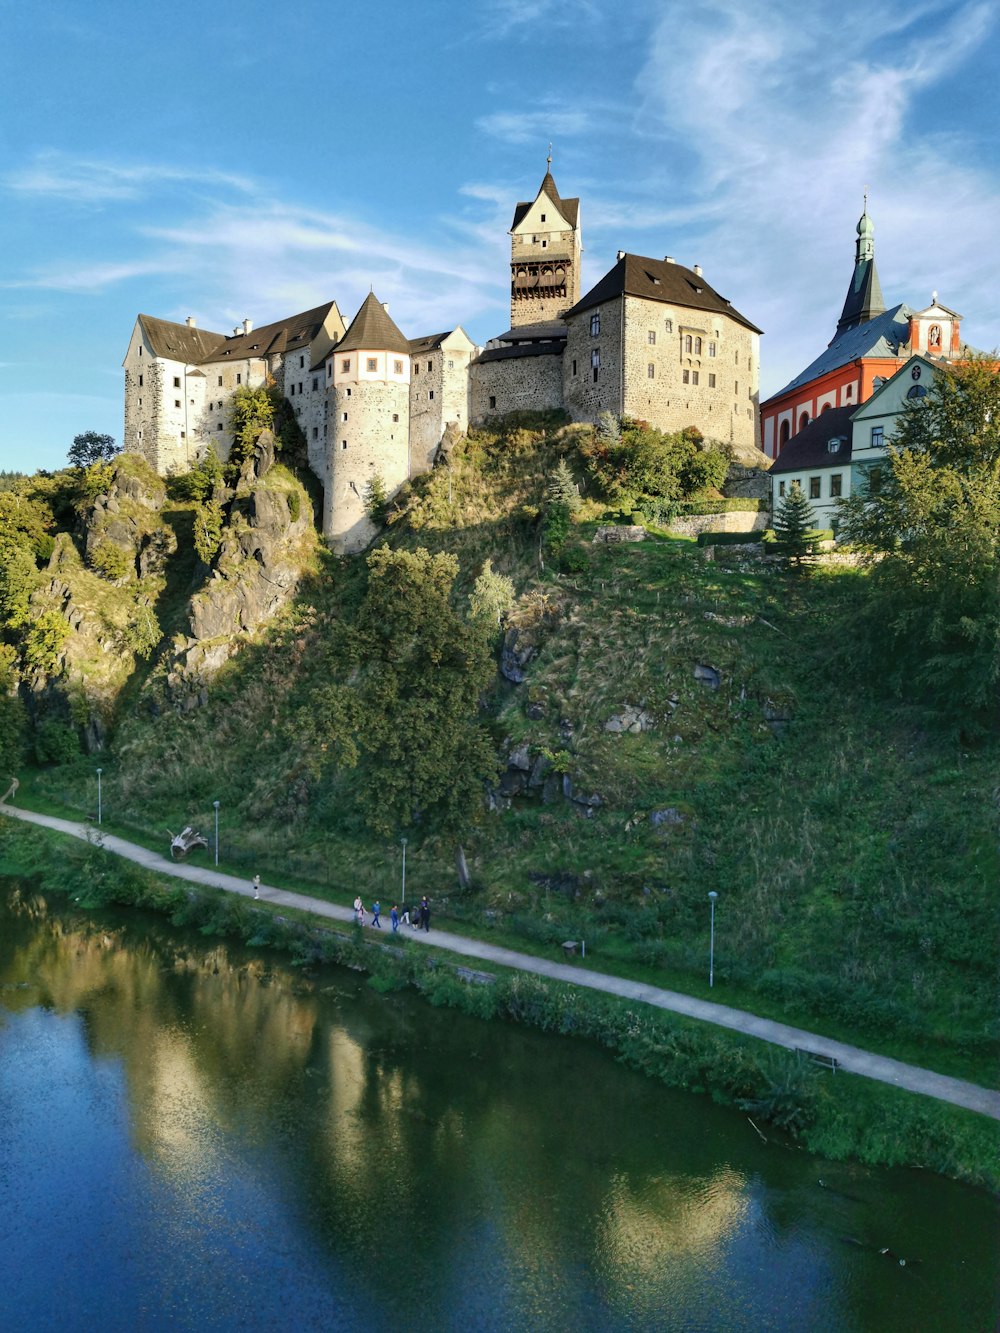 a castle on top of a hill next to a river